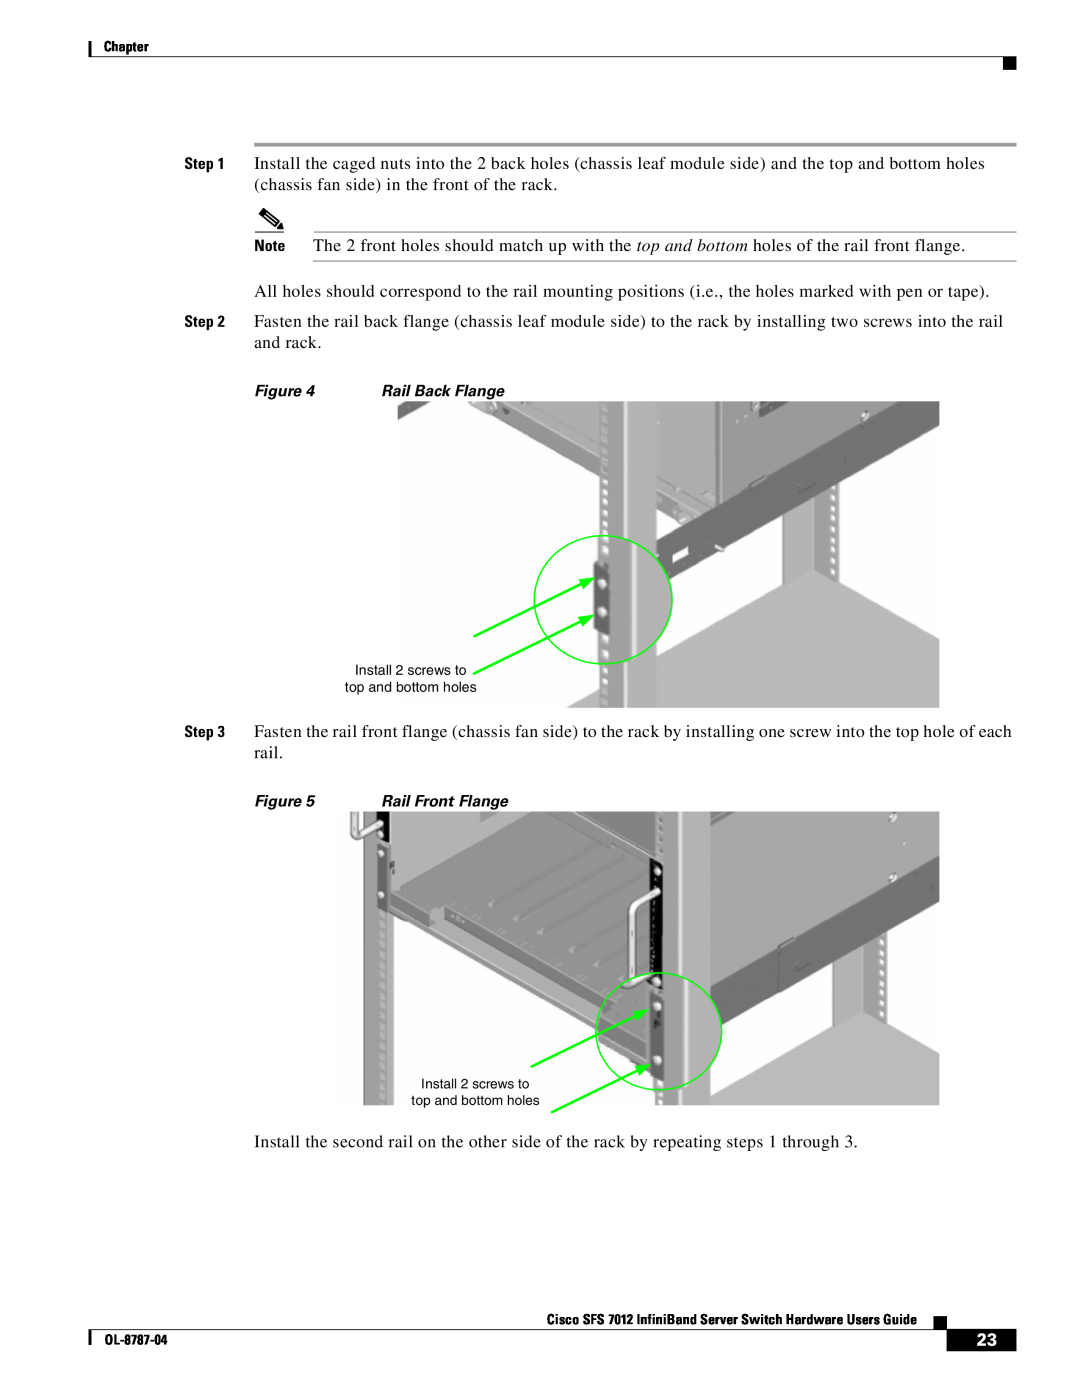 Cisco Systems SFS 7012 manual Rail Front Flange, Install 2 screws to top and bottom holes 